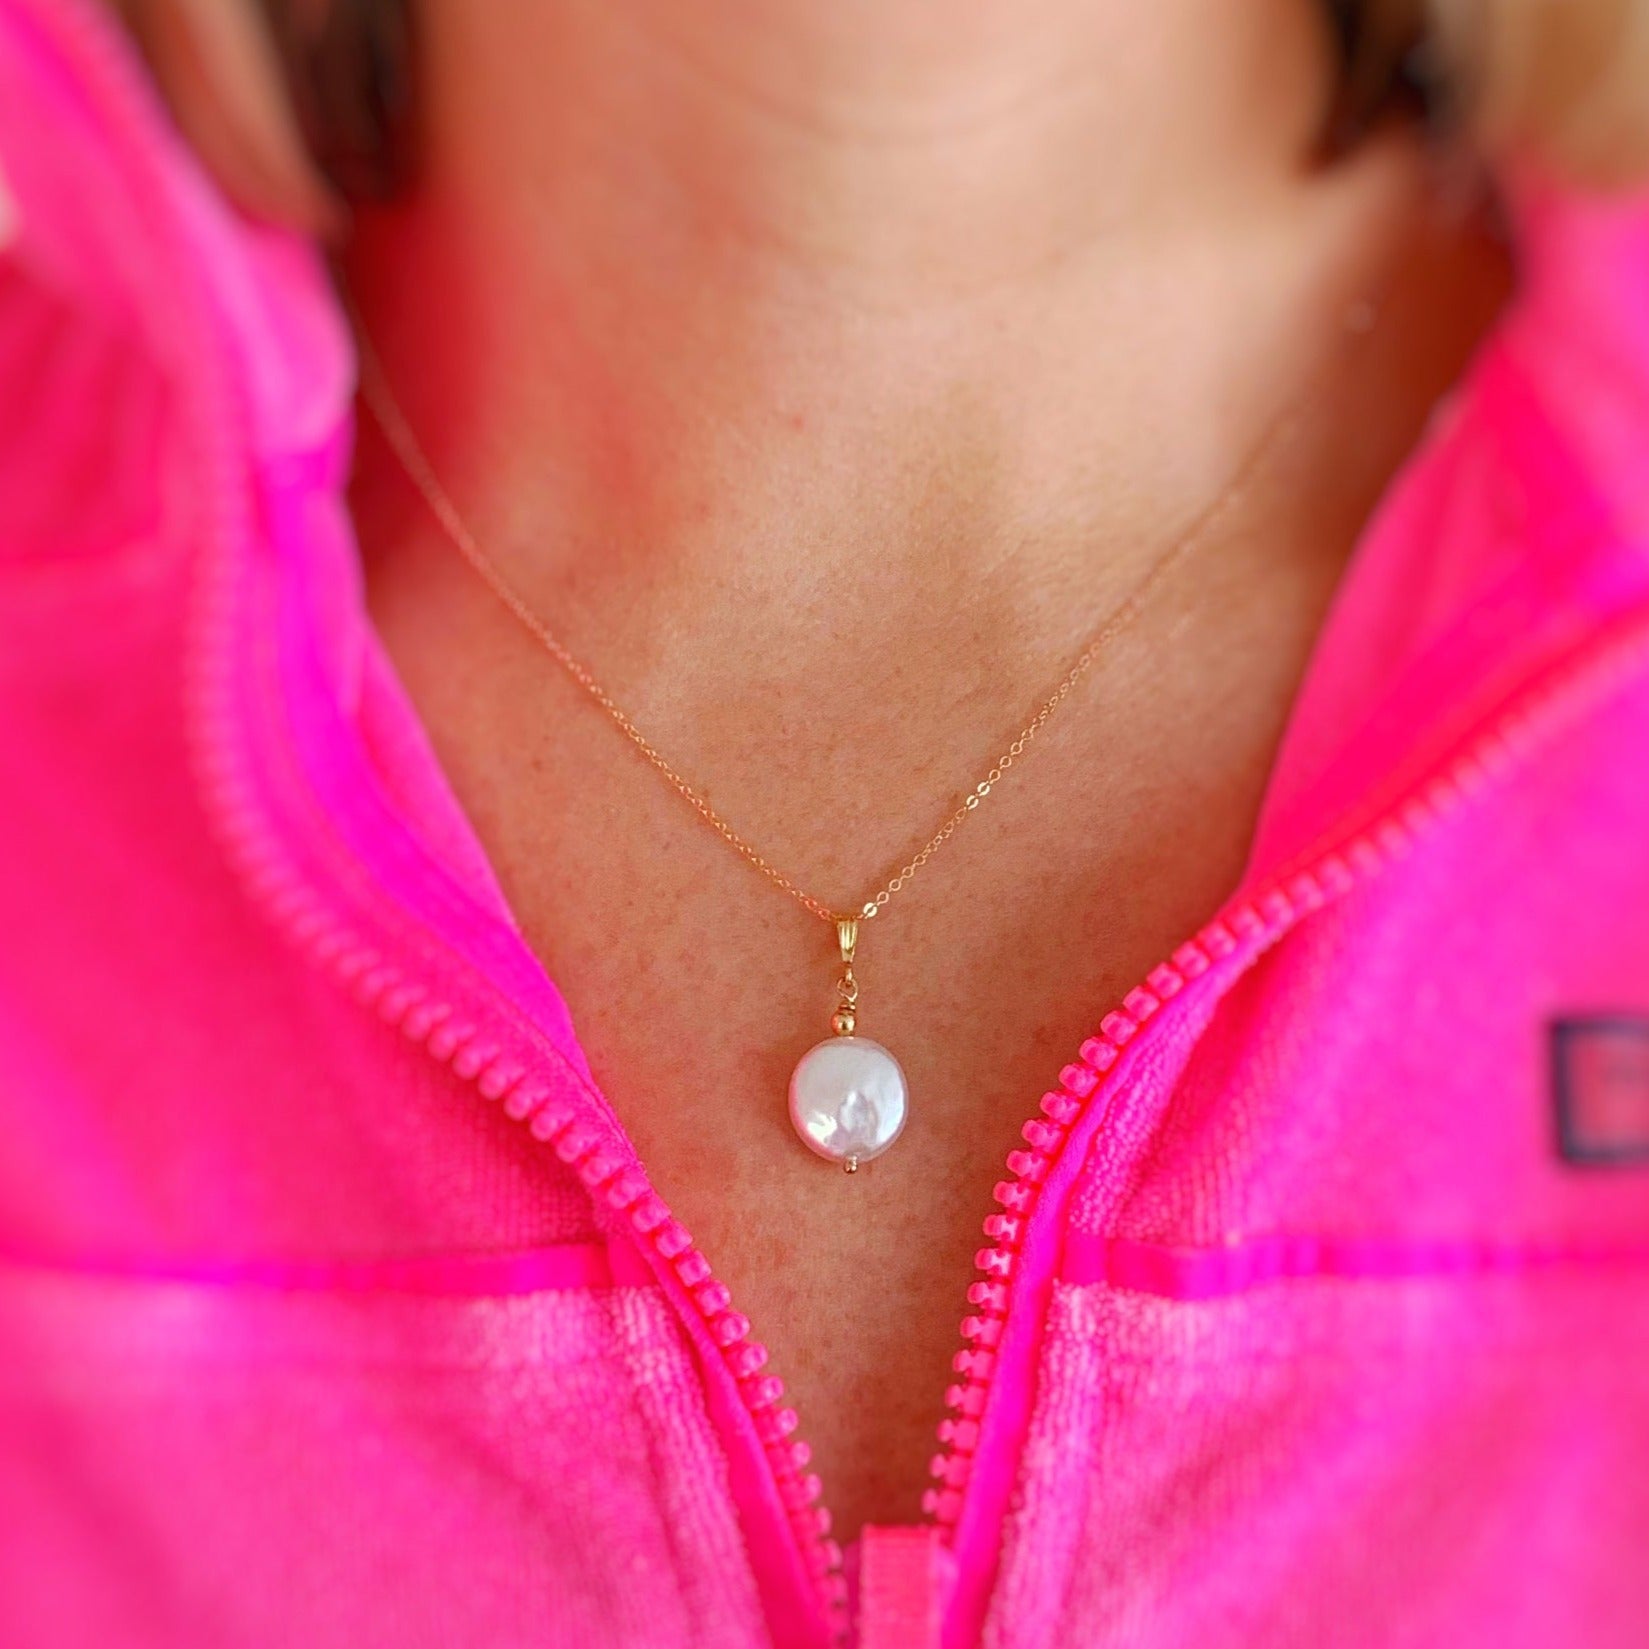 Mermaids and Madeleines Newport Gala necklace in 14k gold filled is created with a large freshwater coin pearl. This pendant style necklace is photographed here on a person with a bright pink quarter zip top